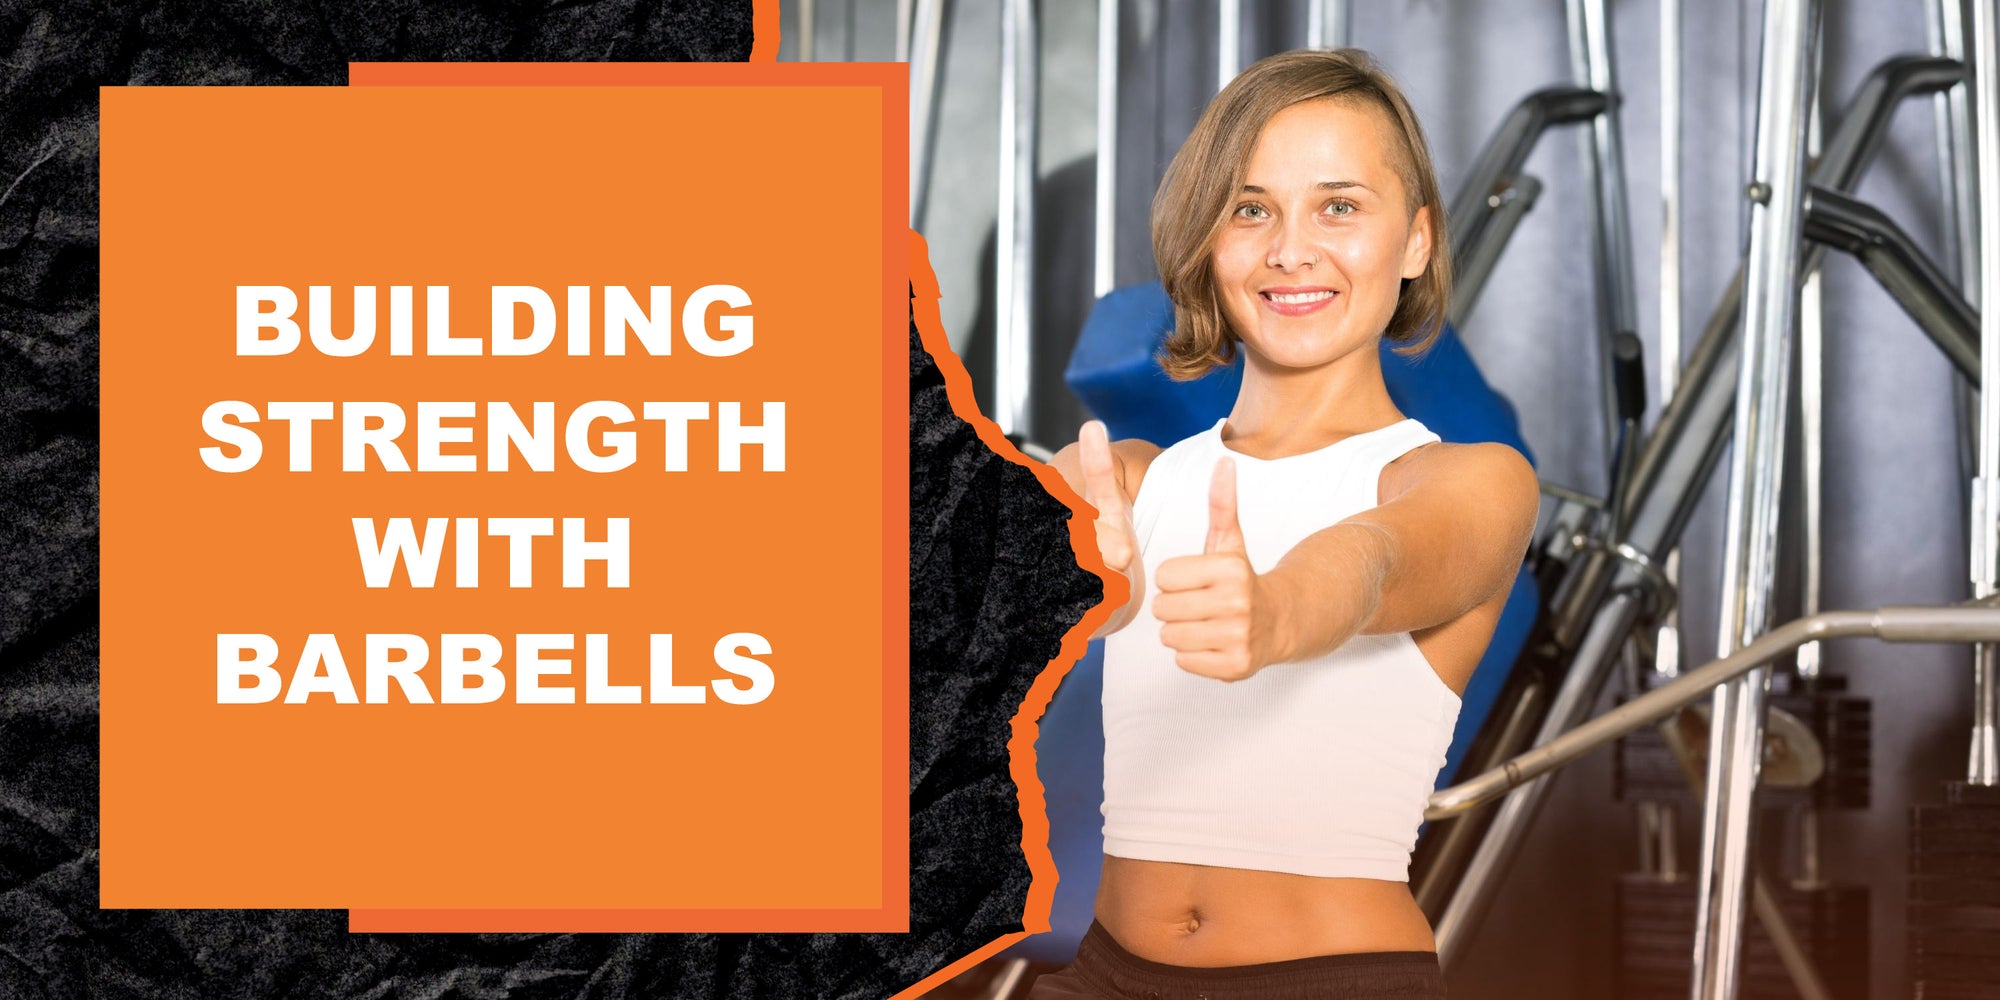 Building Strength With Barbells